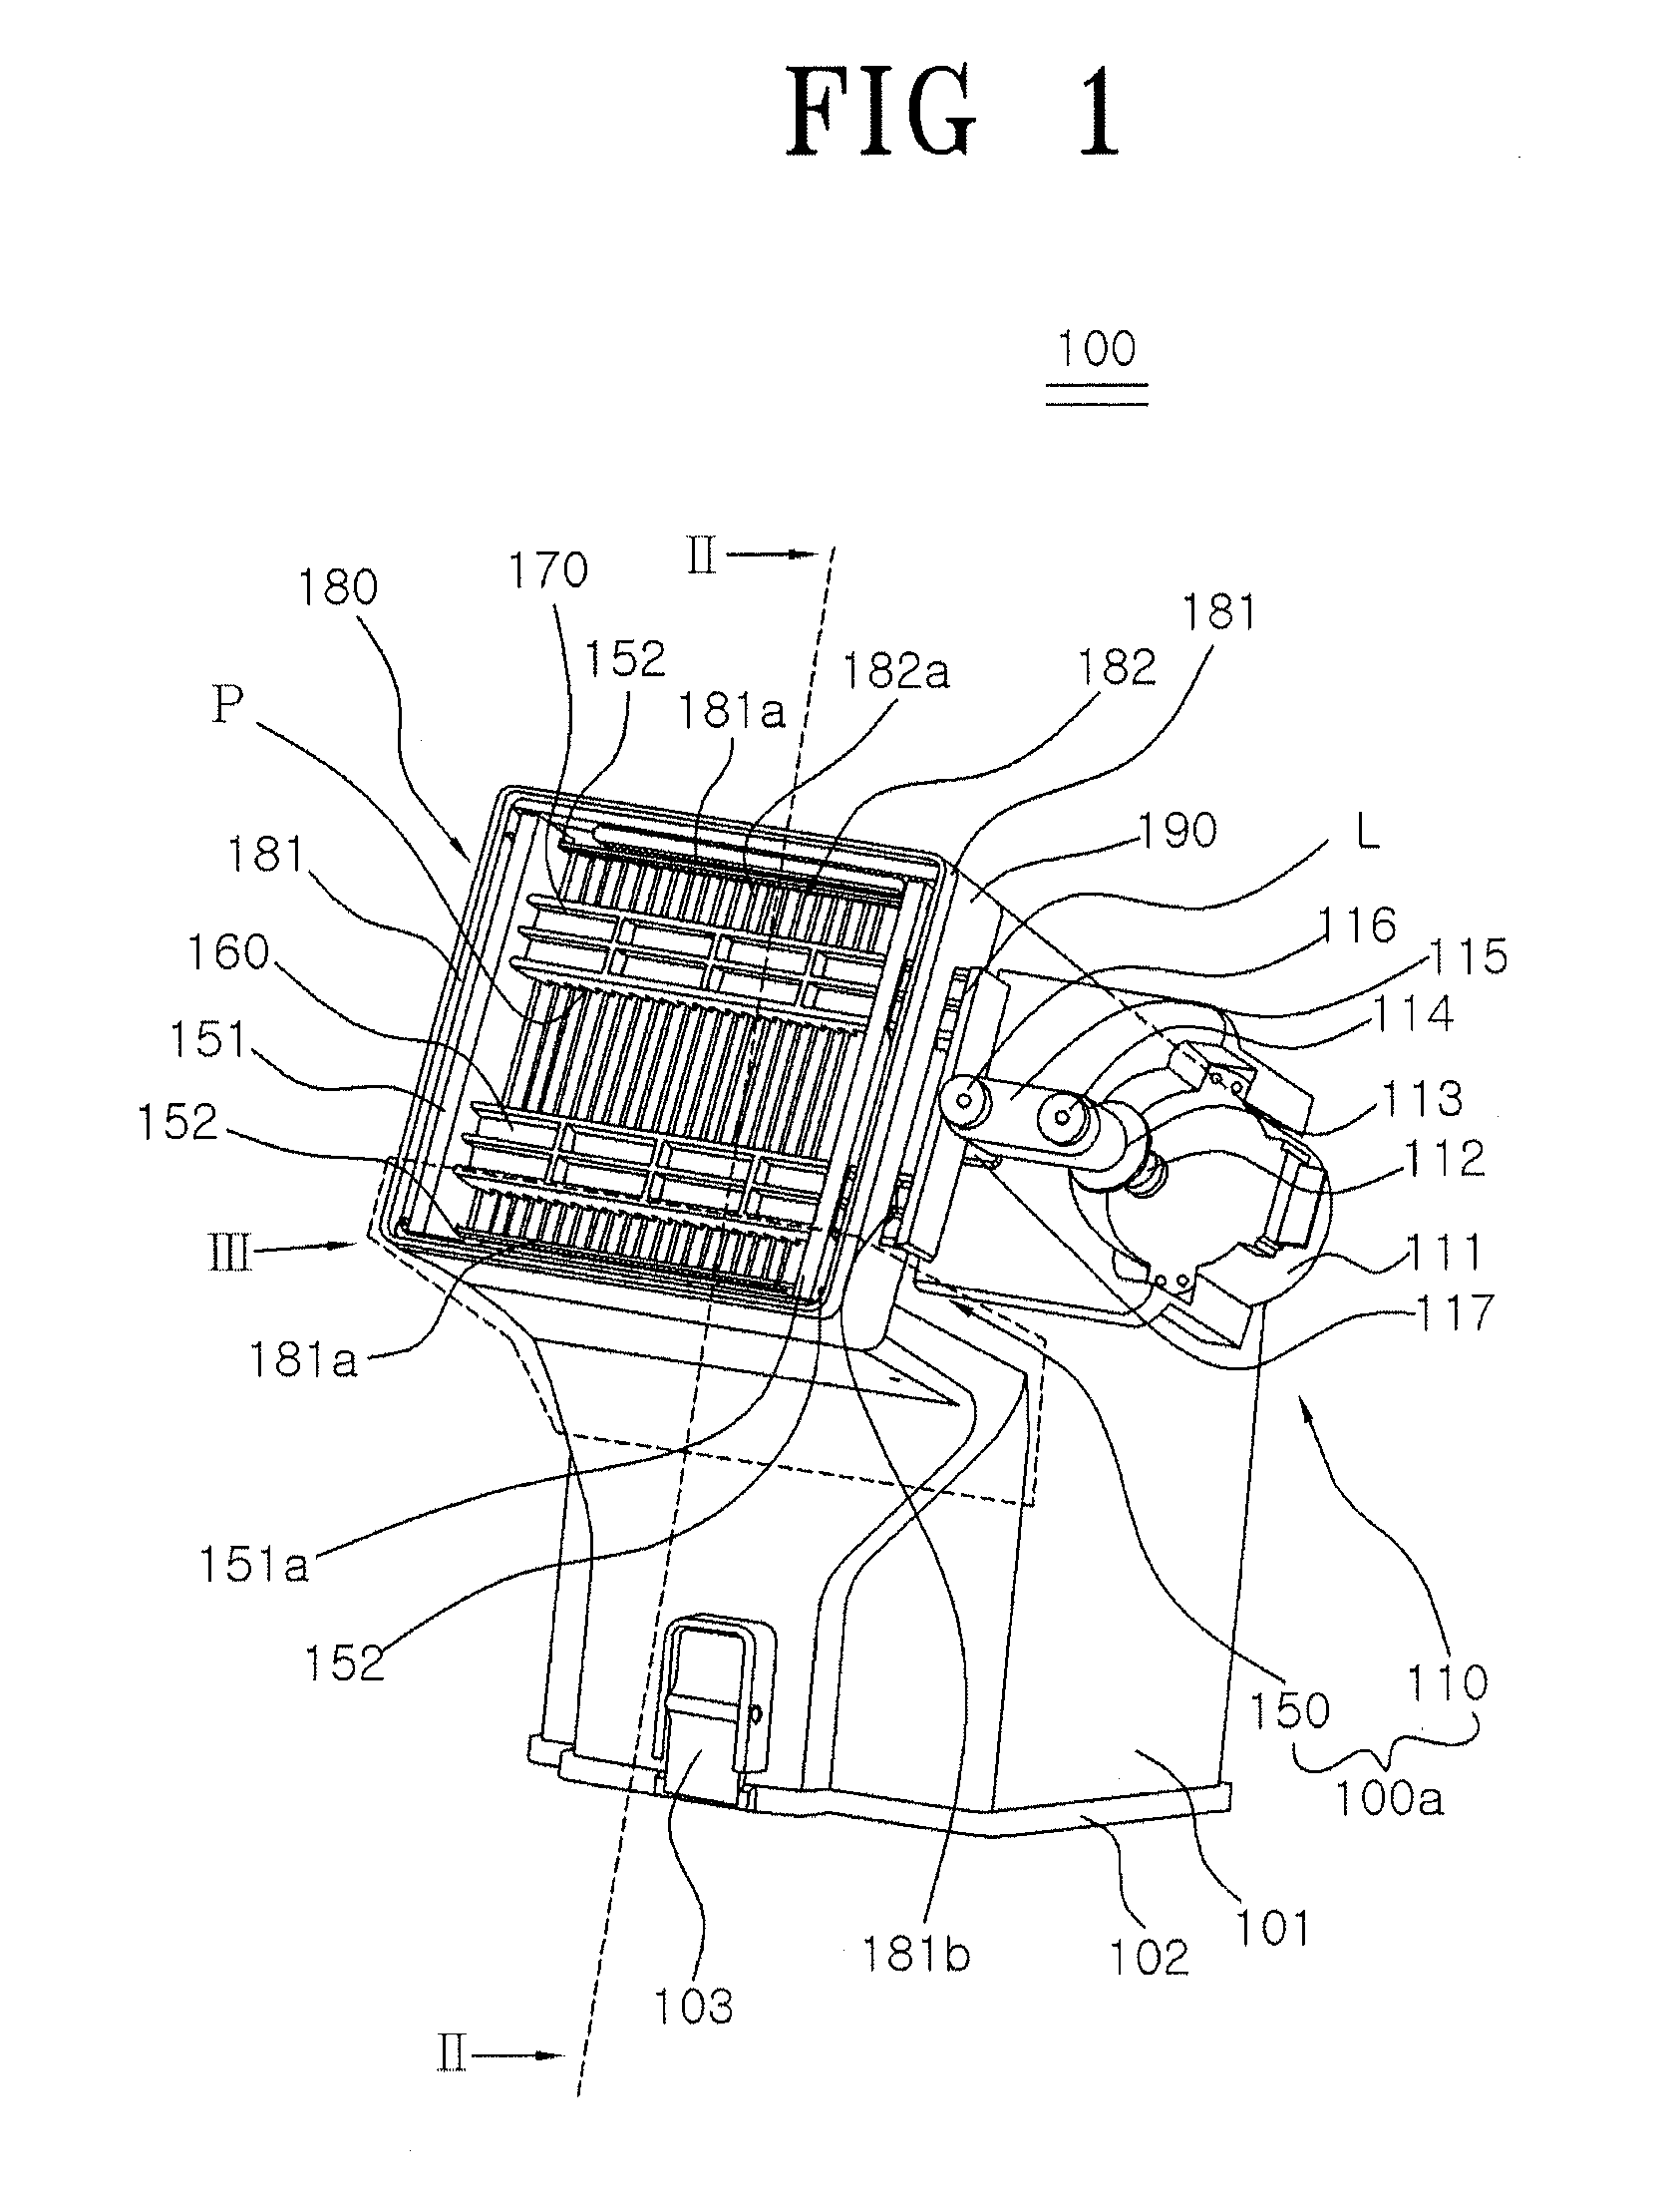 Dust collector for a vacuum cleaner having a dust removal function